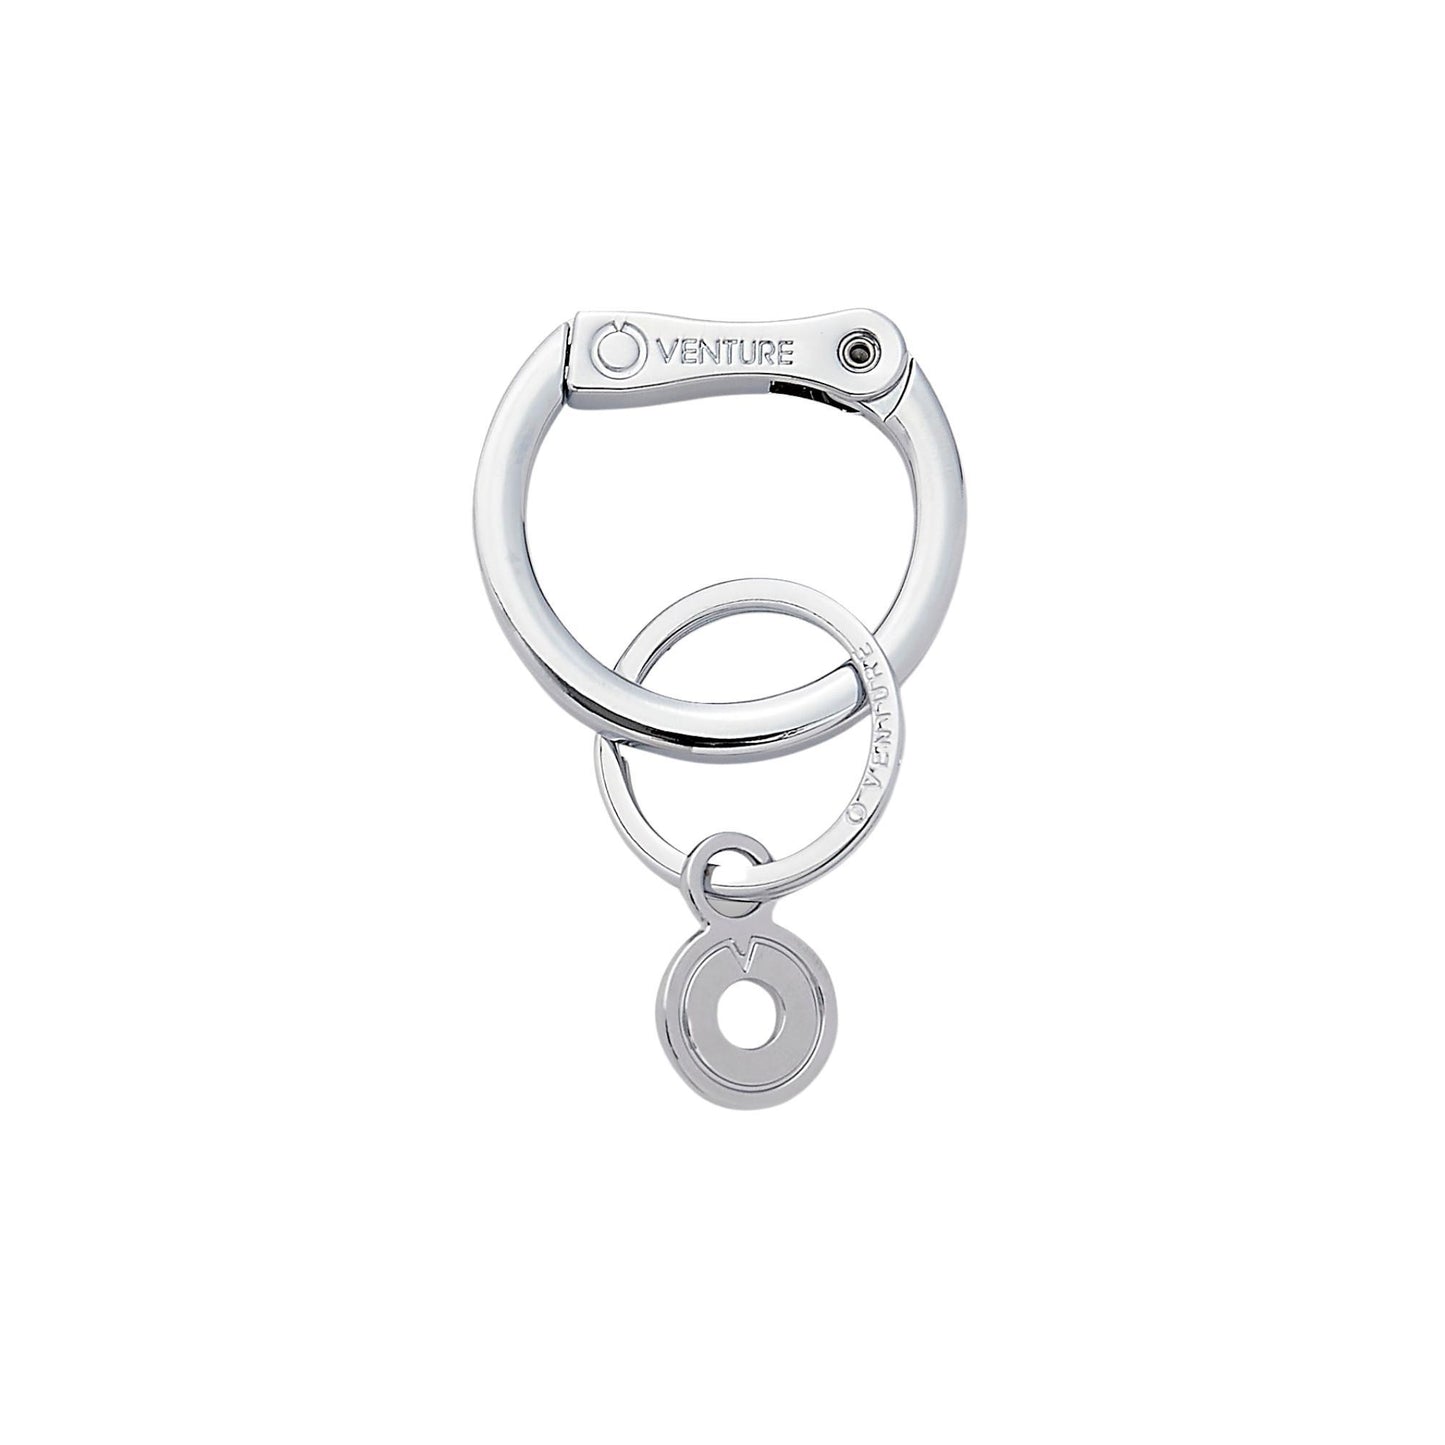 Quicksilver locking clasp with Oventure logo charm attached